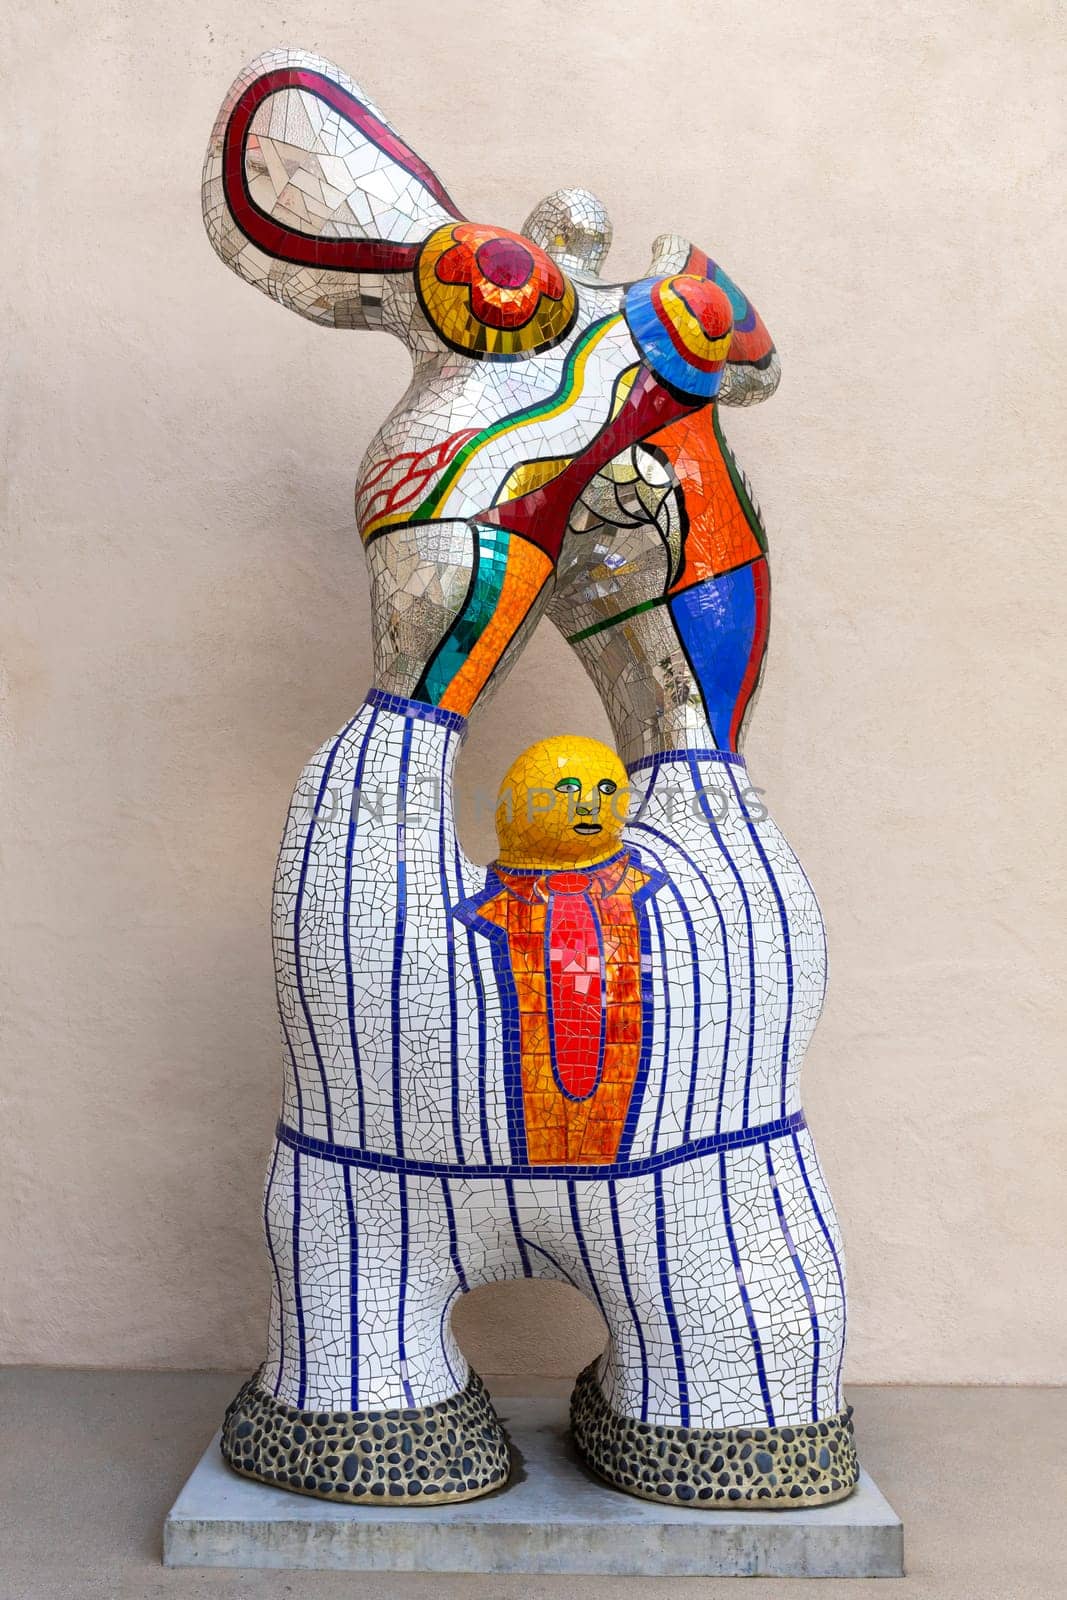 Colorful Mosaic Sculpture Poet and Muse Near Mingei Museum, Balboa Park Created By French American Sculptor Niki De Saint Phalle. Vertical Plane. San Diego, Usa. March 13th, 2024 by netatsi